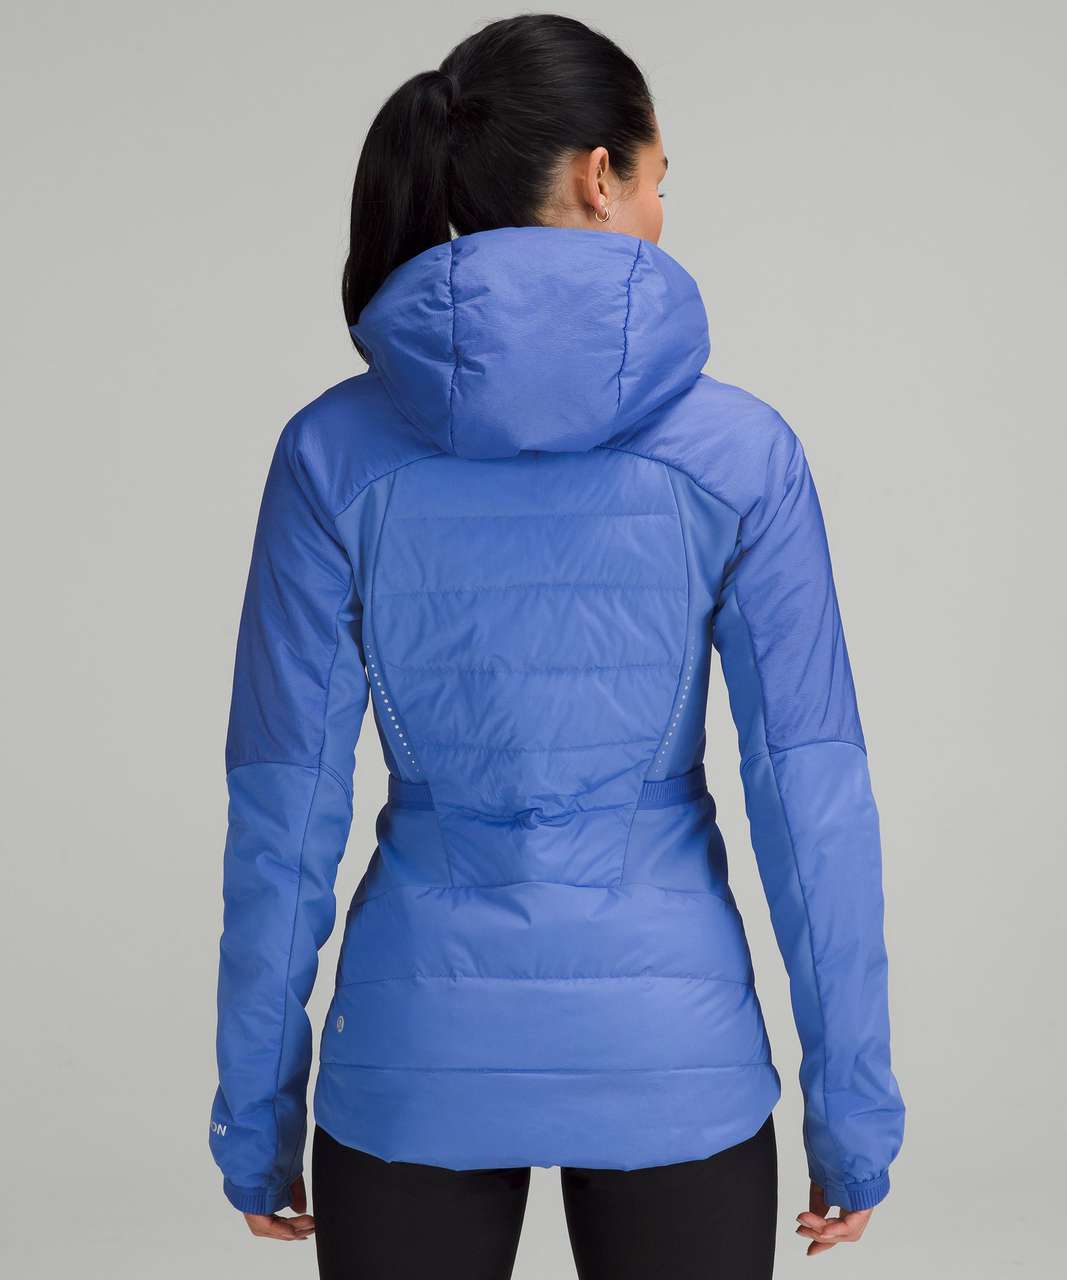 NWT Lululemon Down for It All Jacket Blue Nile 6 Run Sport Activewear